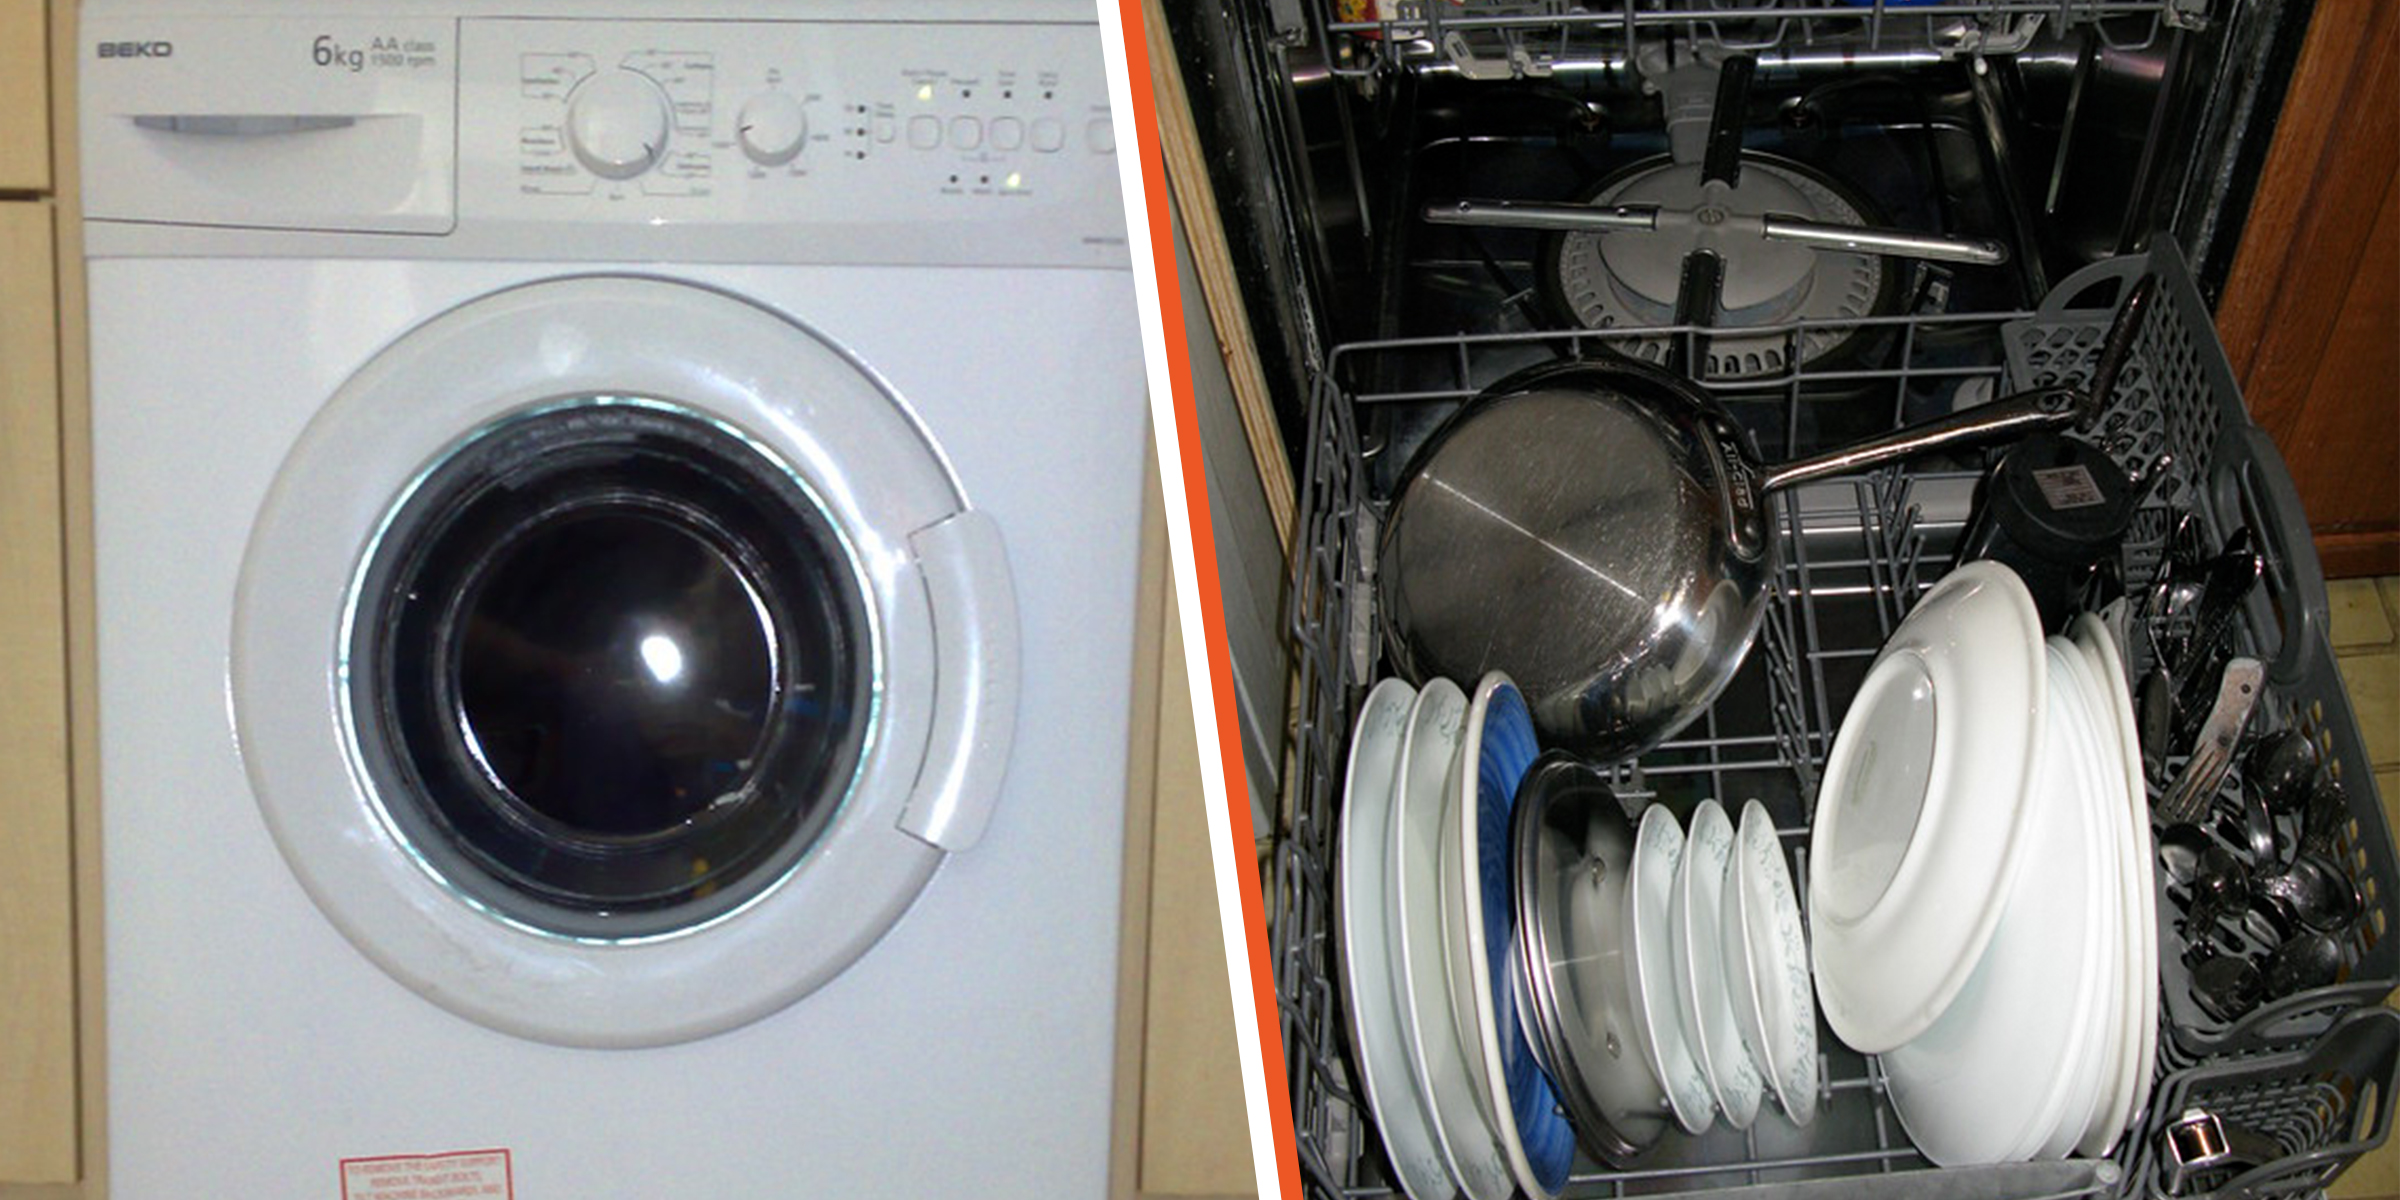 A washing machine and a dishwasher | Source: Flickr/markhillary/CC BY 2.0 & Flickr/OroAnnM/CC BY 2.0)